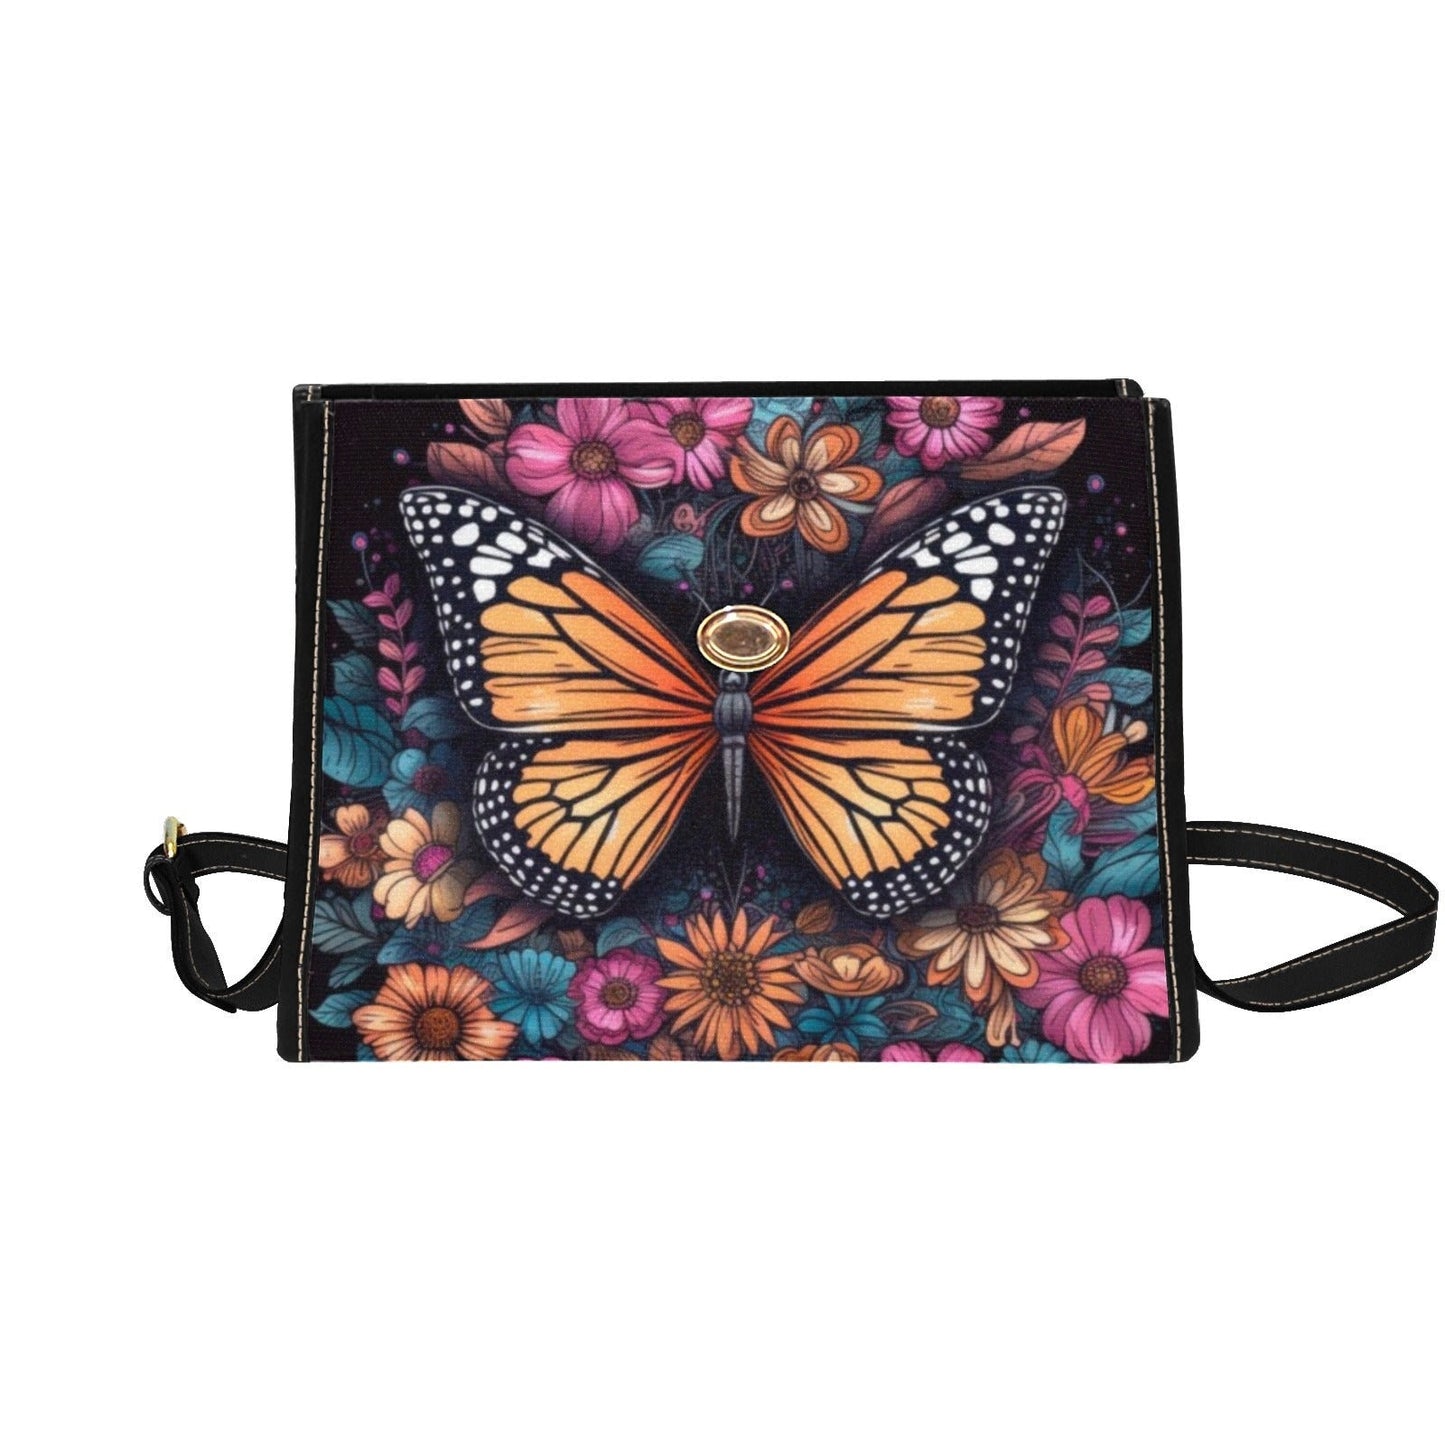 Magical Butterfly Celestial Satchel bag, Cottagecore spring forestcore crossbody purse, cute vegan leather strap goth bag hippies boho gift